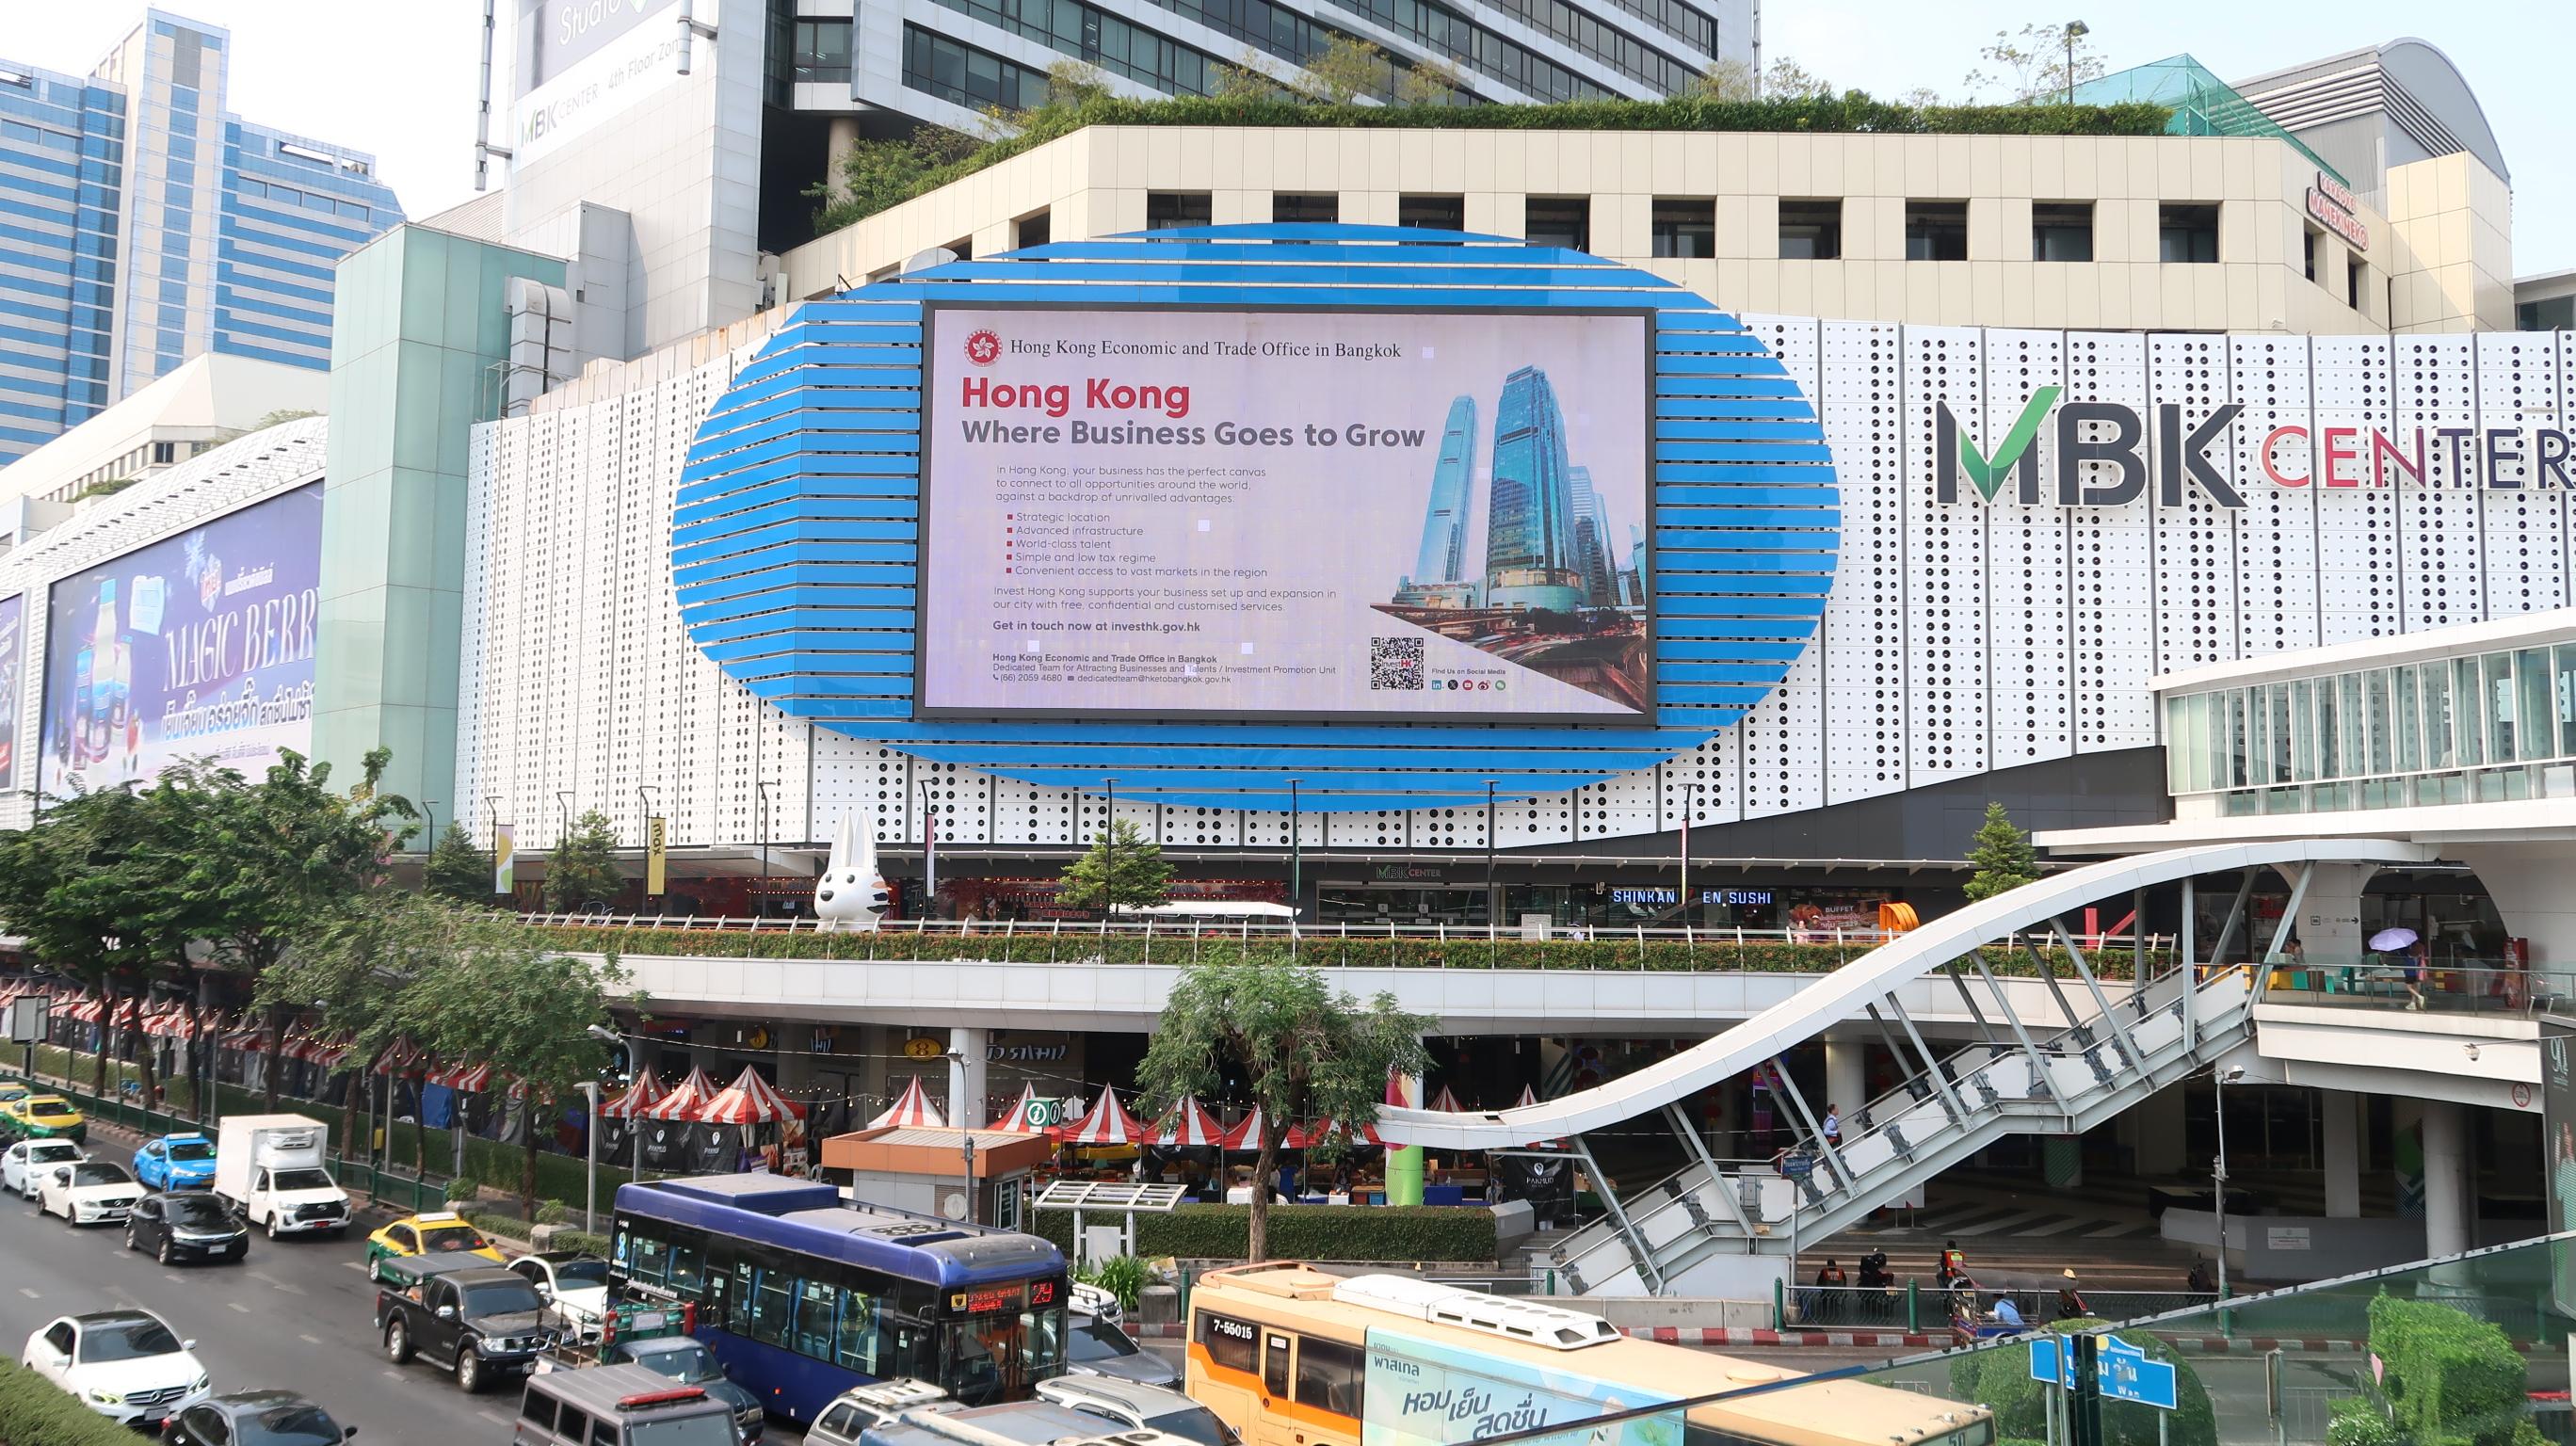 The Hong Kong Economic and Trade Office in Bangkok launched a campaign in Thailand to promote the myriad opportunities in Hong Kong for businesses and talent. 